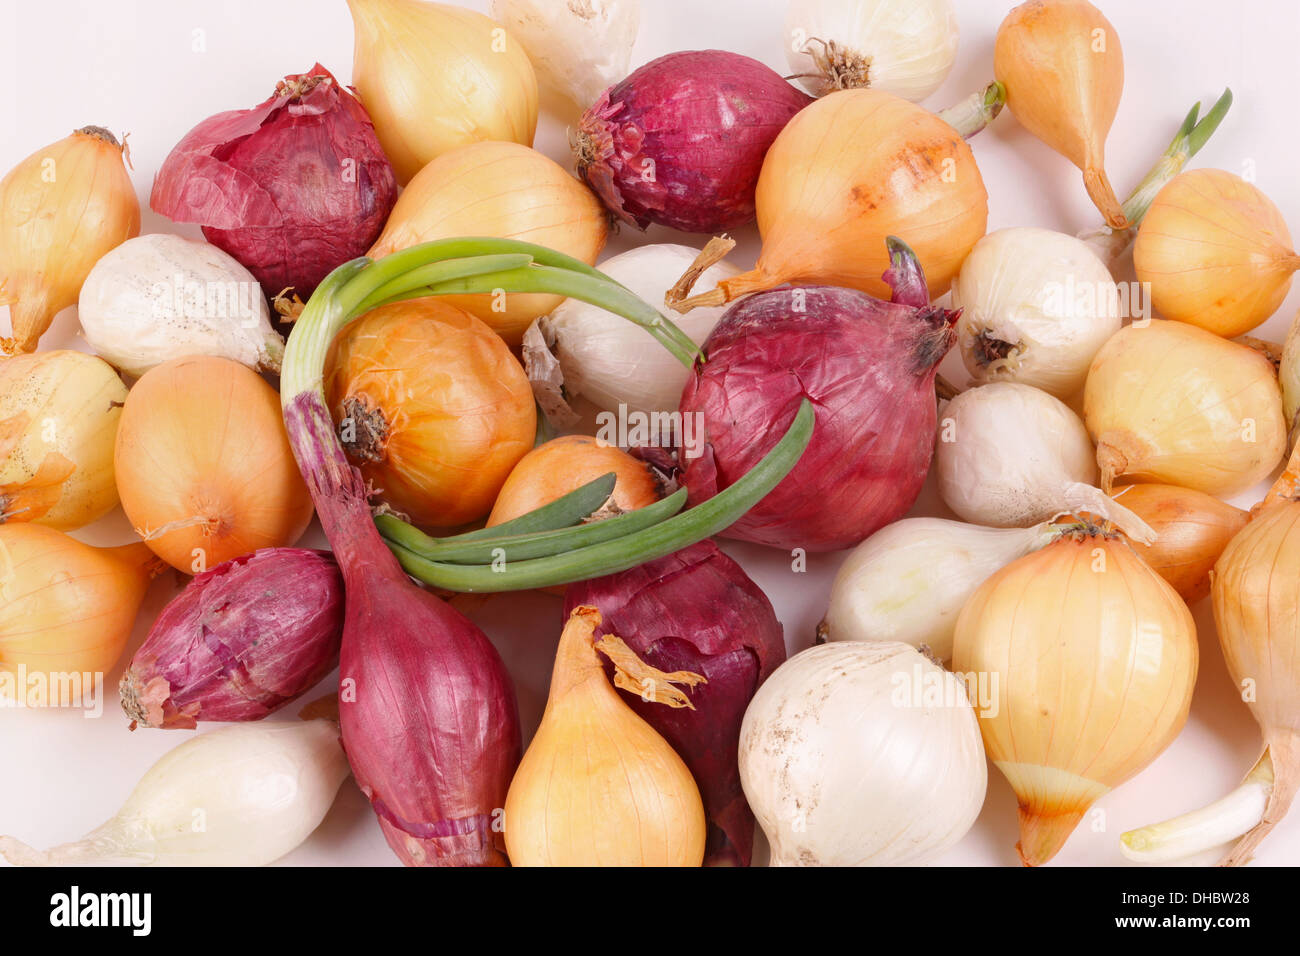 Small bulbs of red, white and yellow onions (Allium cepa) ready to be planted as sets or used for cooking Stock Photo